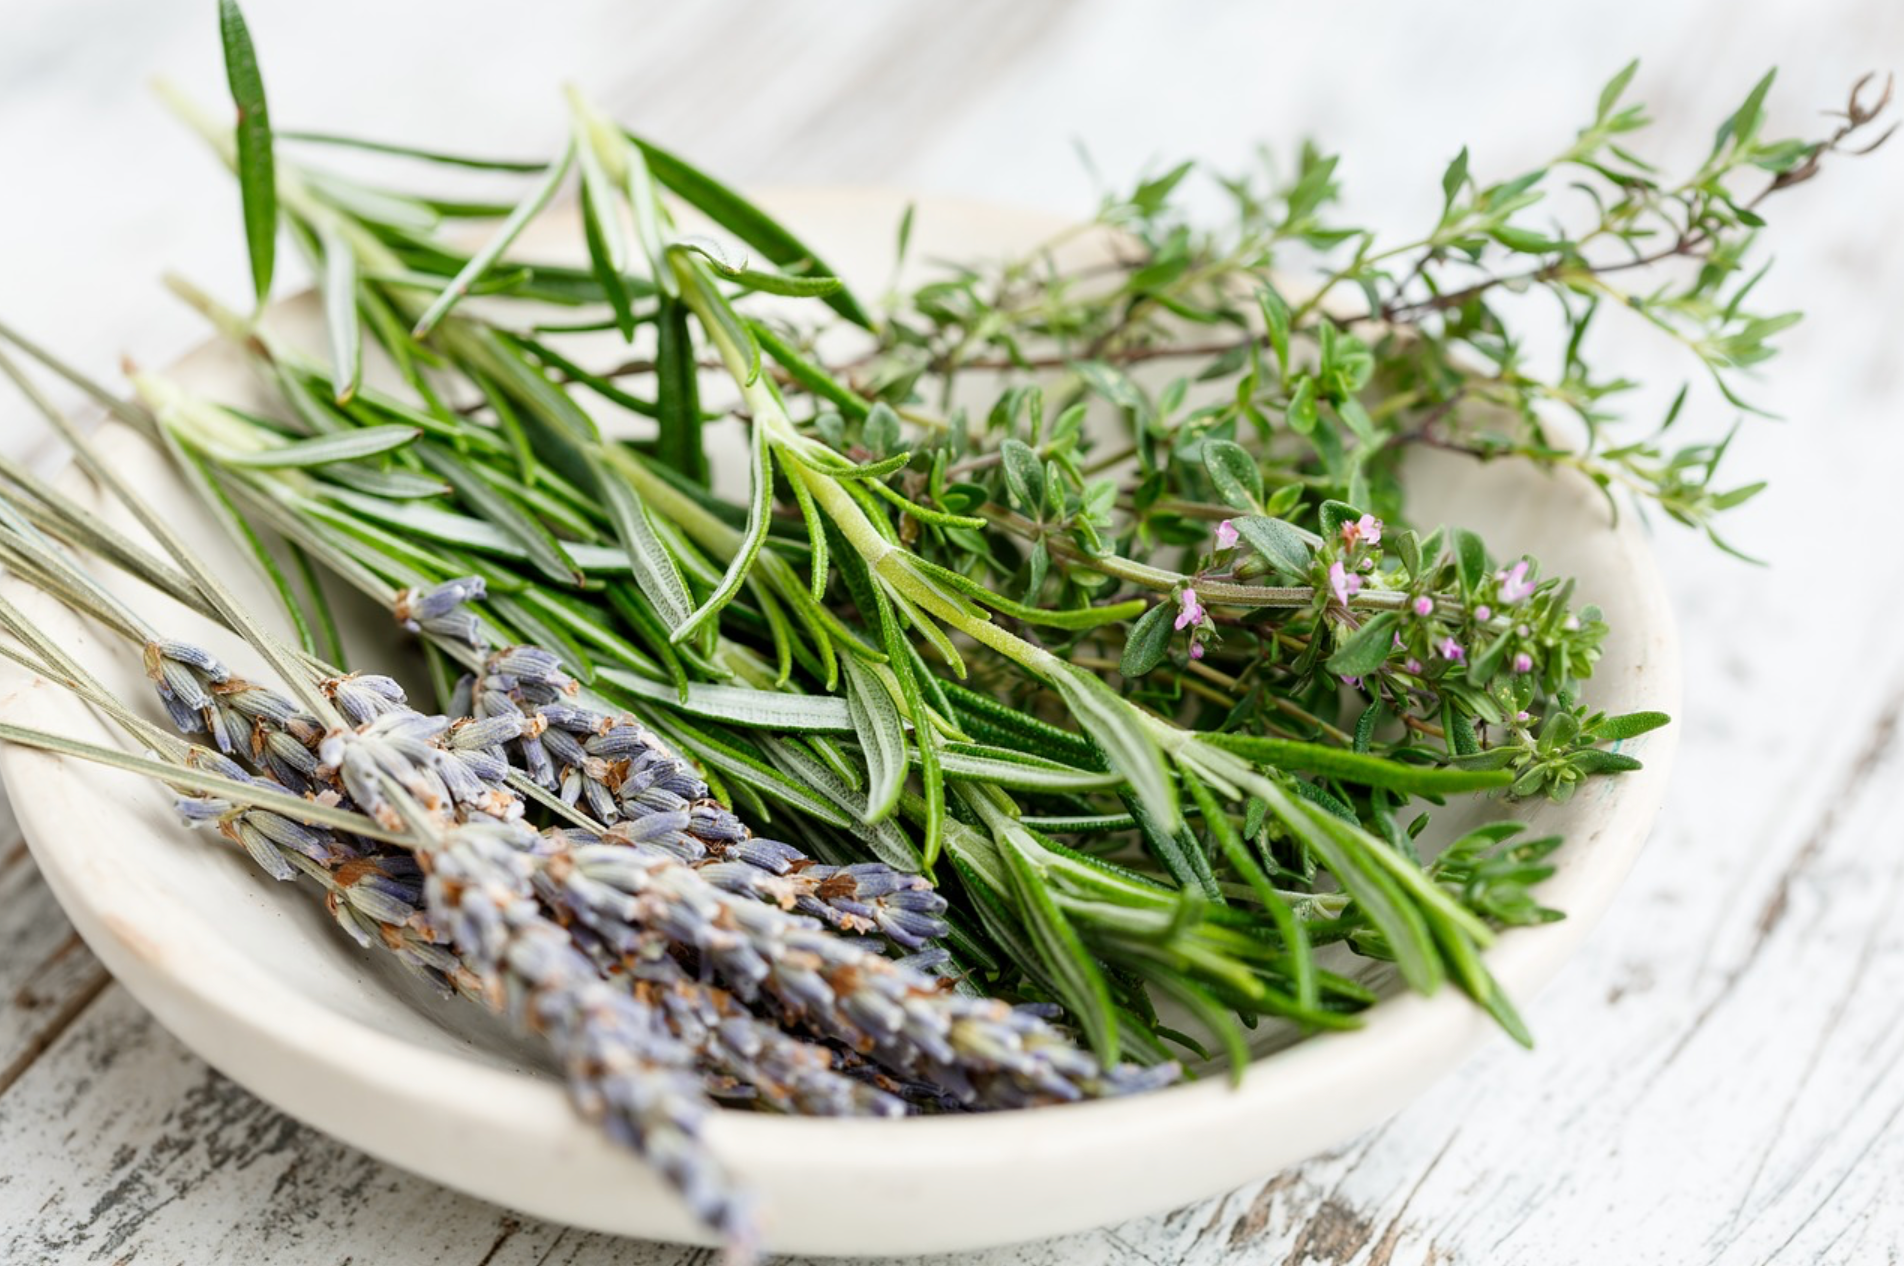 Nature's Gift to us - Cleaning with Herbs